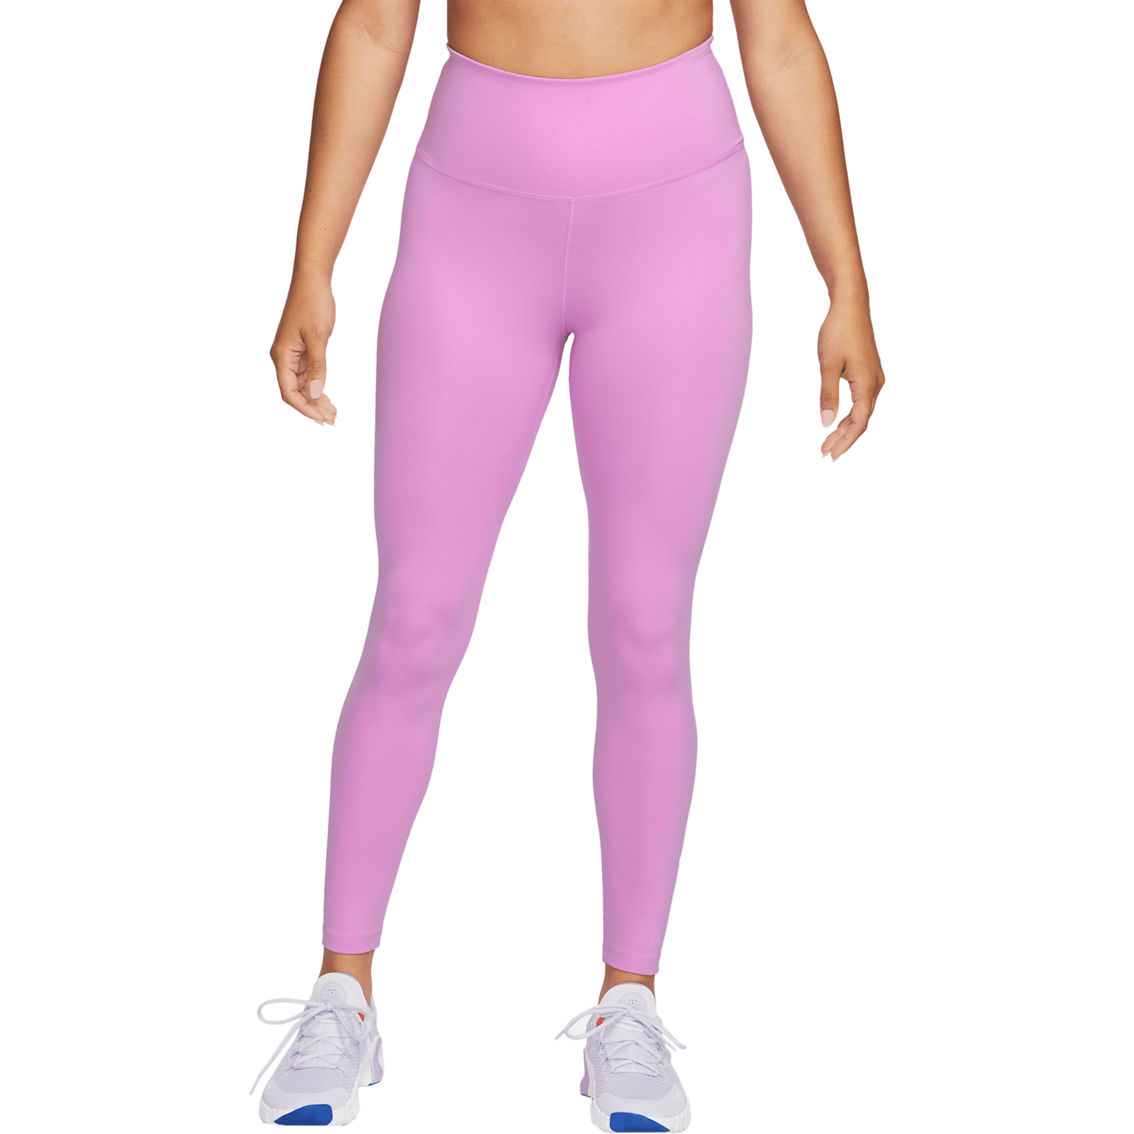 Nike One Dri Fit High Rise Tights | Pants & Capris | Clothing ...